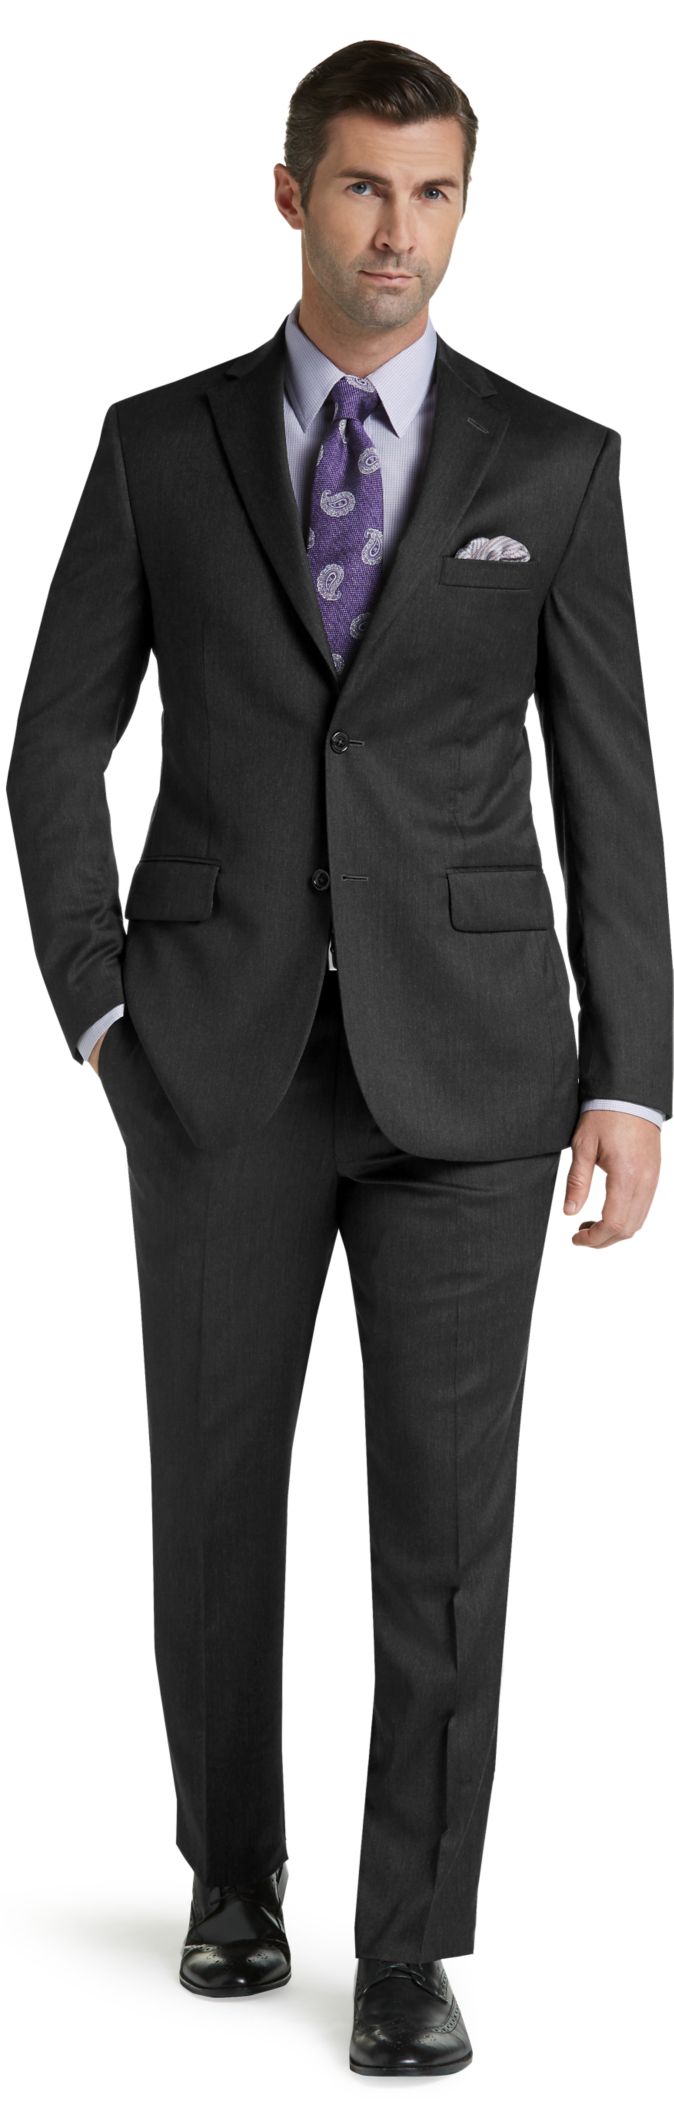 Signature Collection Tailored Fit Suit - Big & Tall - Signature Suits ...